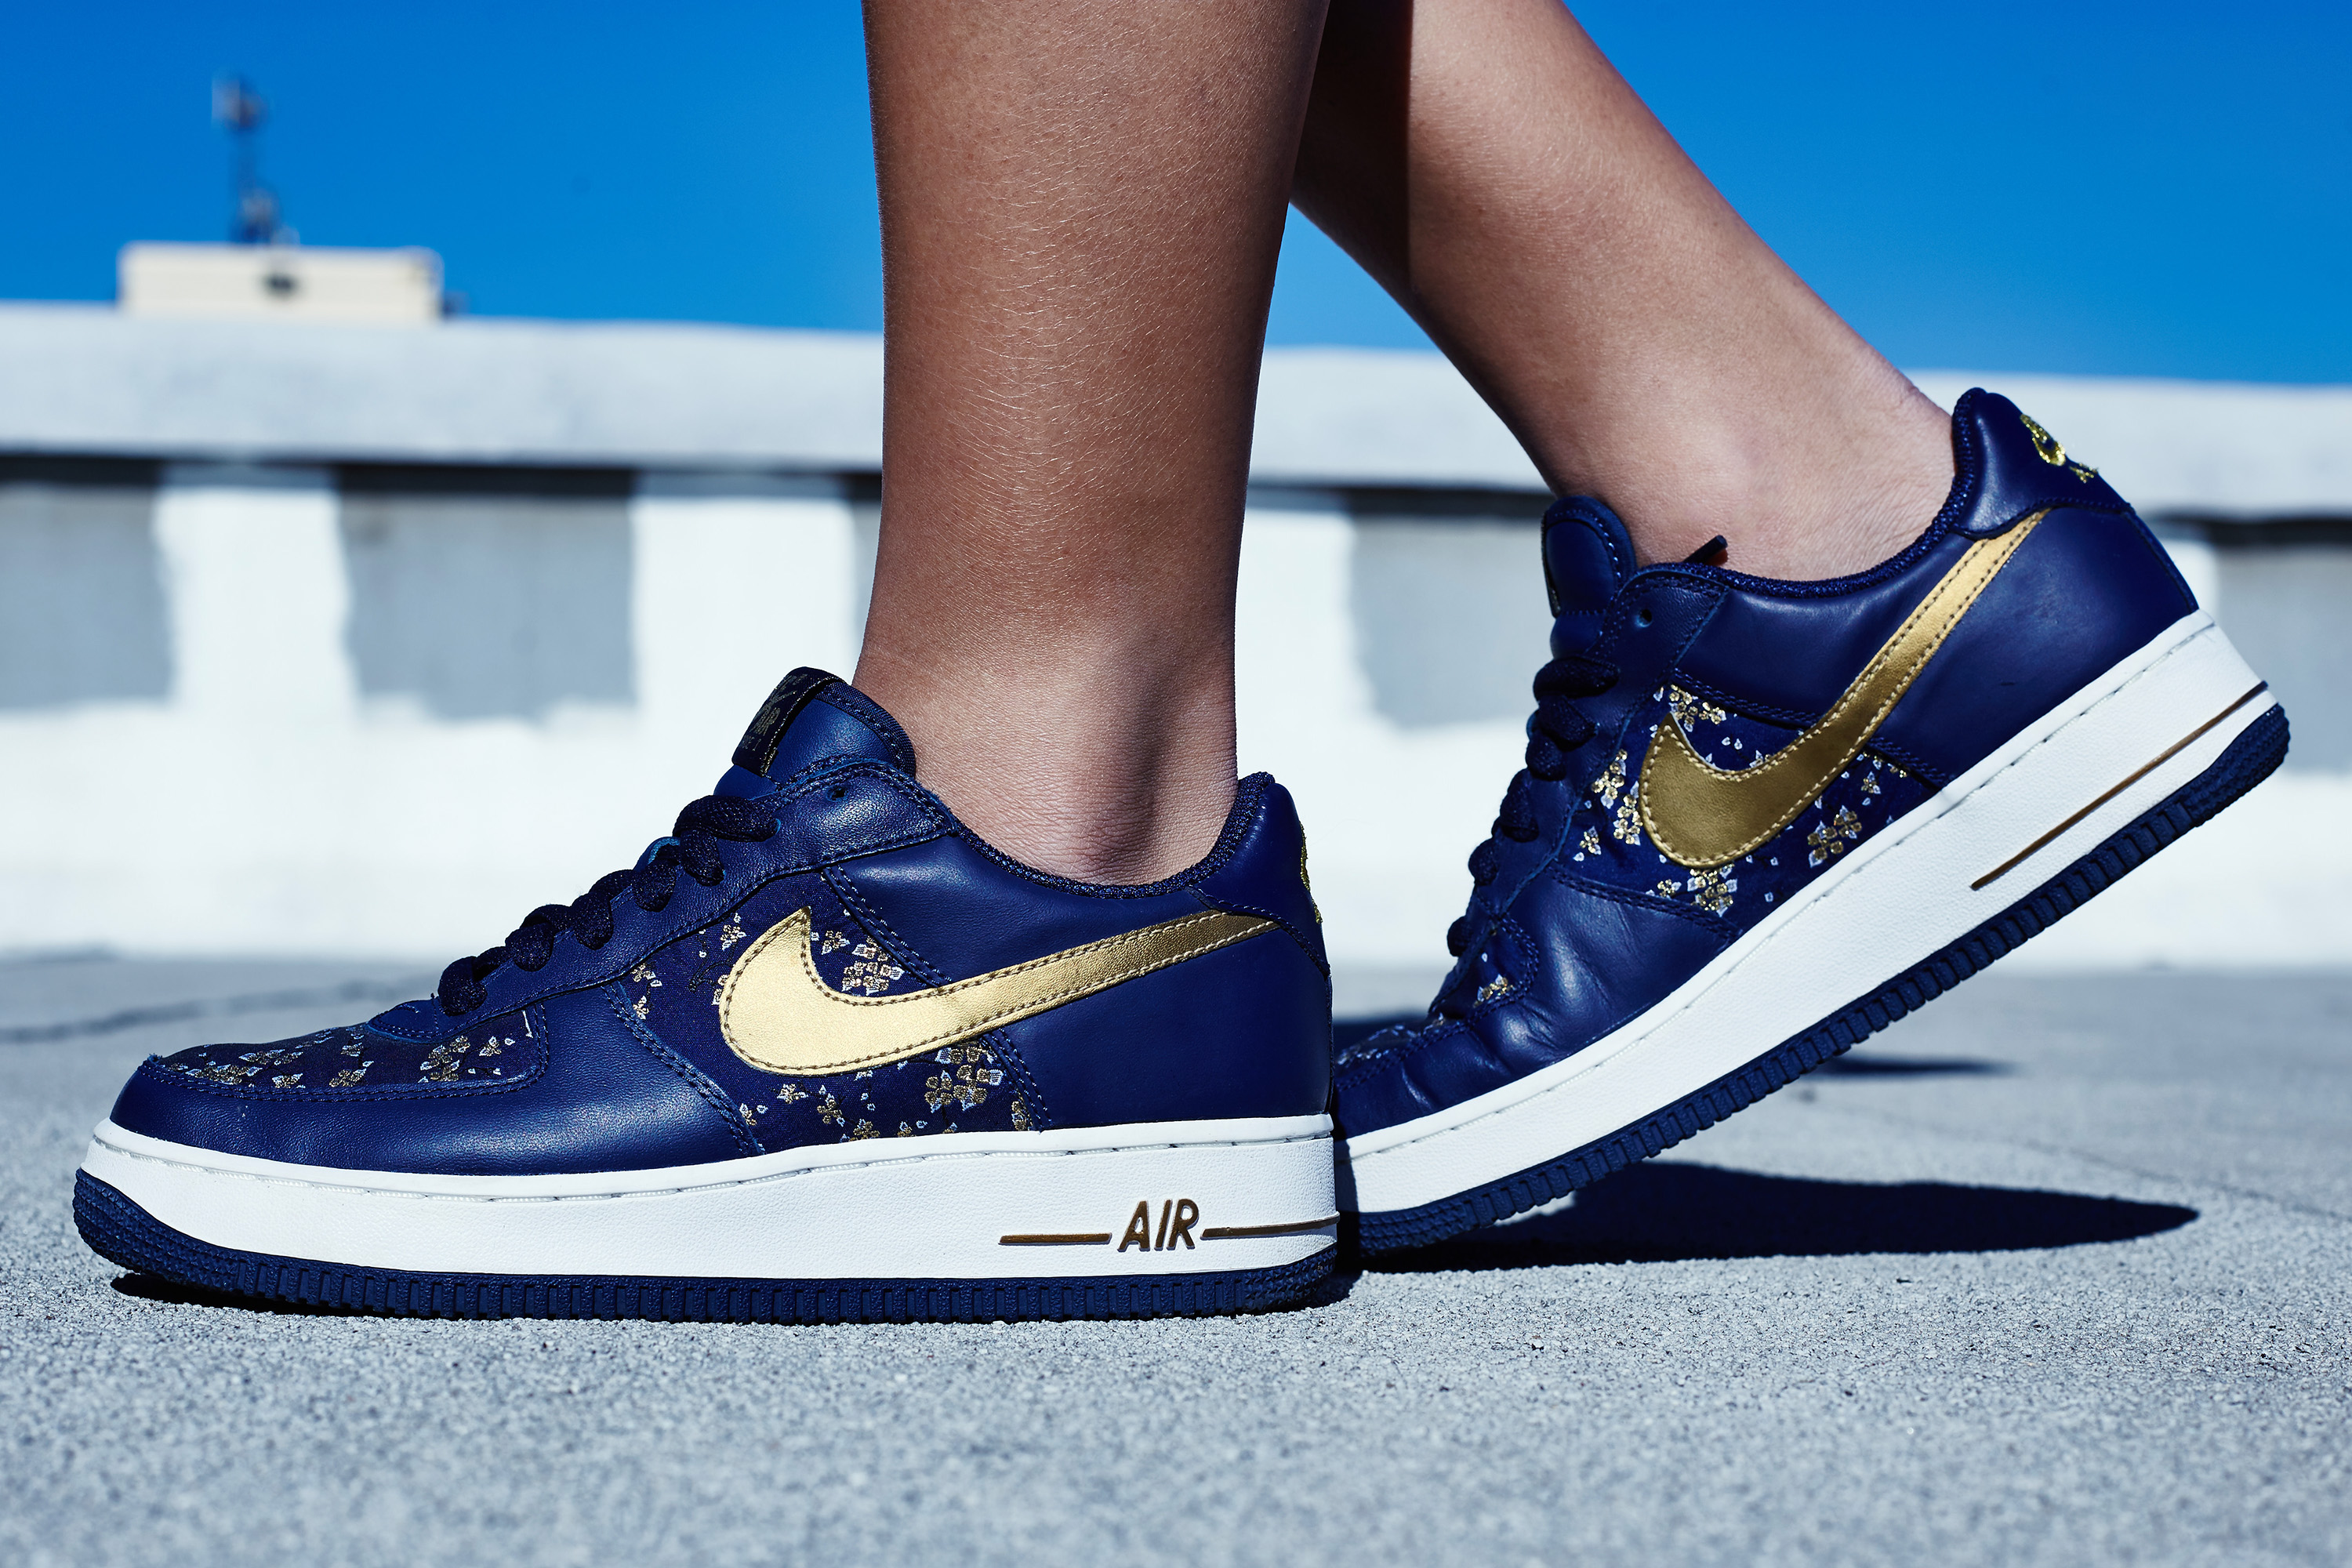 Nike WMNS Air Force 1 Low Navy/Gold 